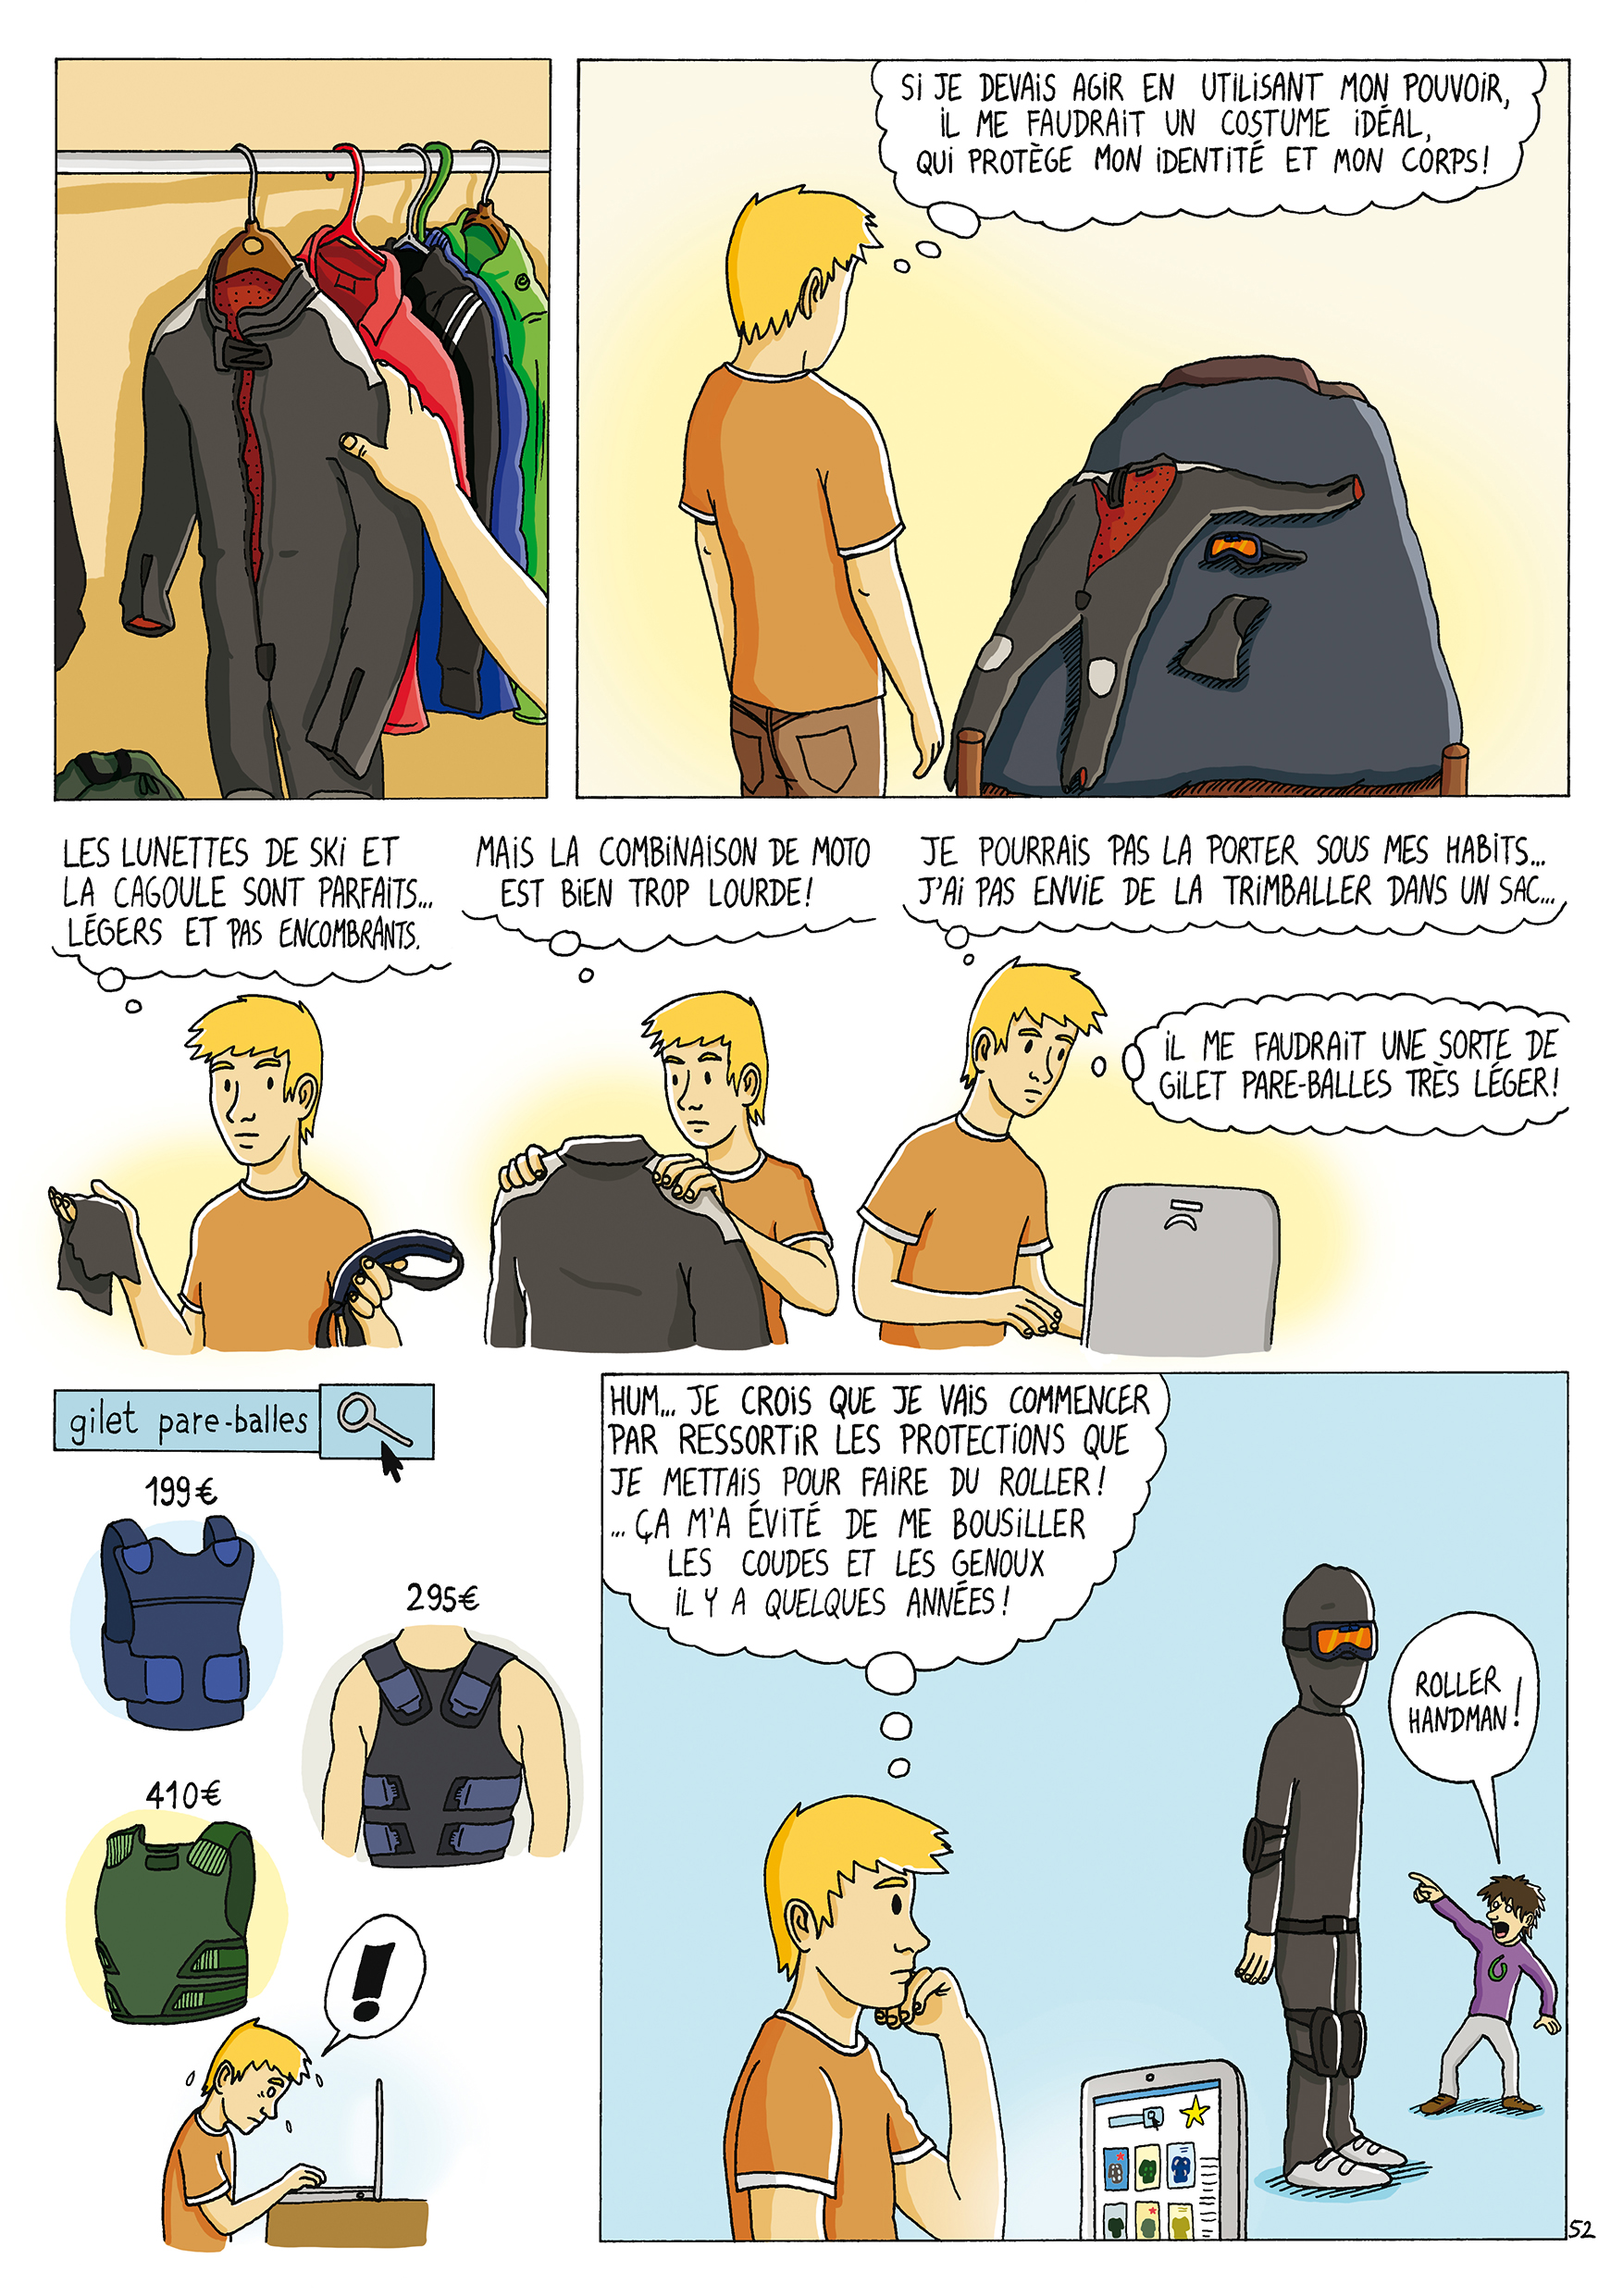 tome2-page52(5)couleur RVB